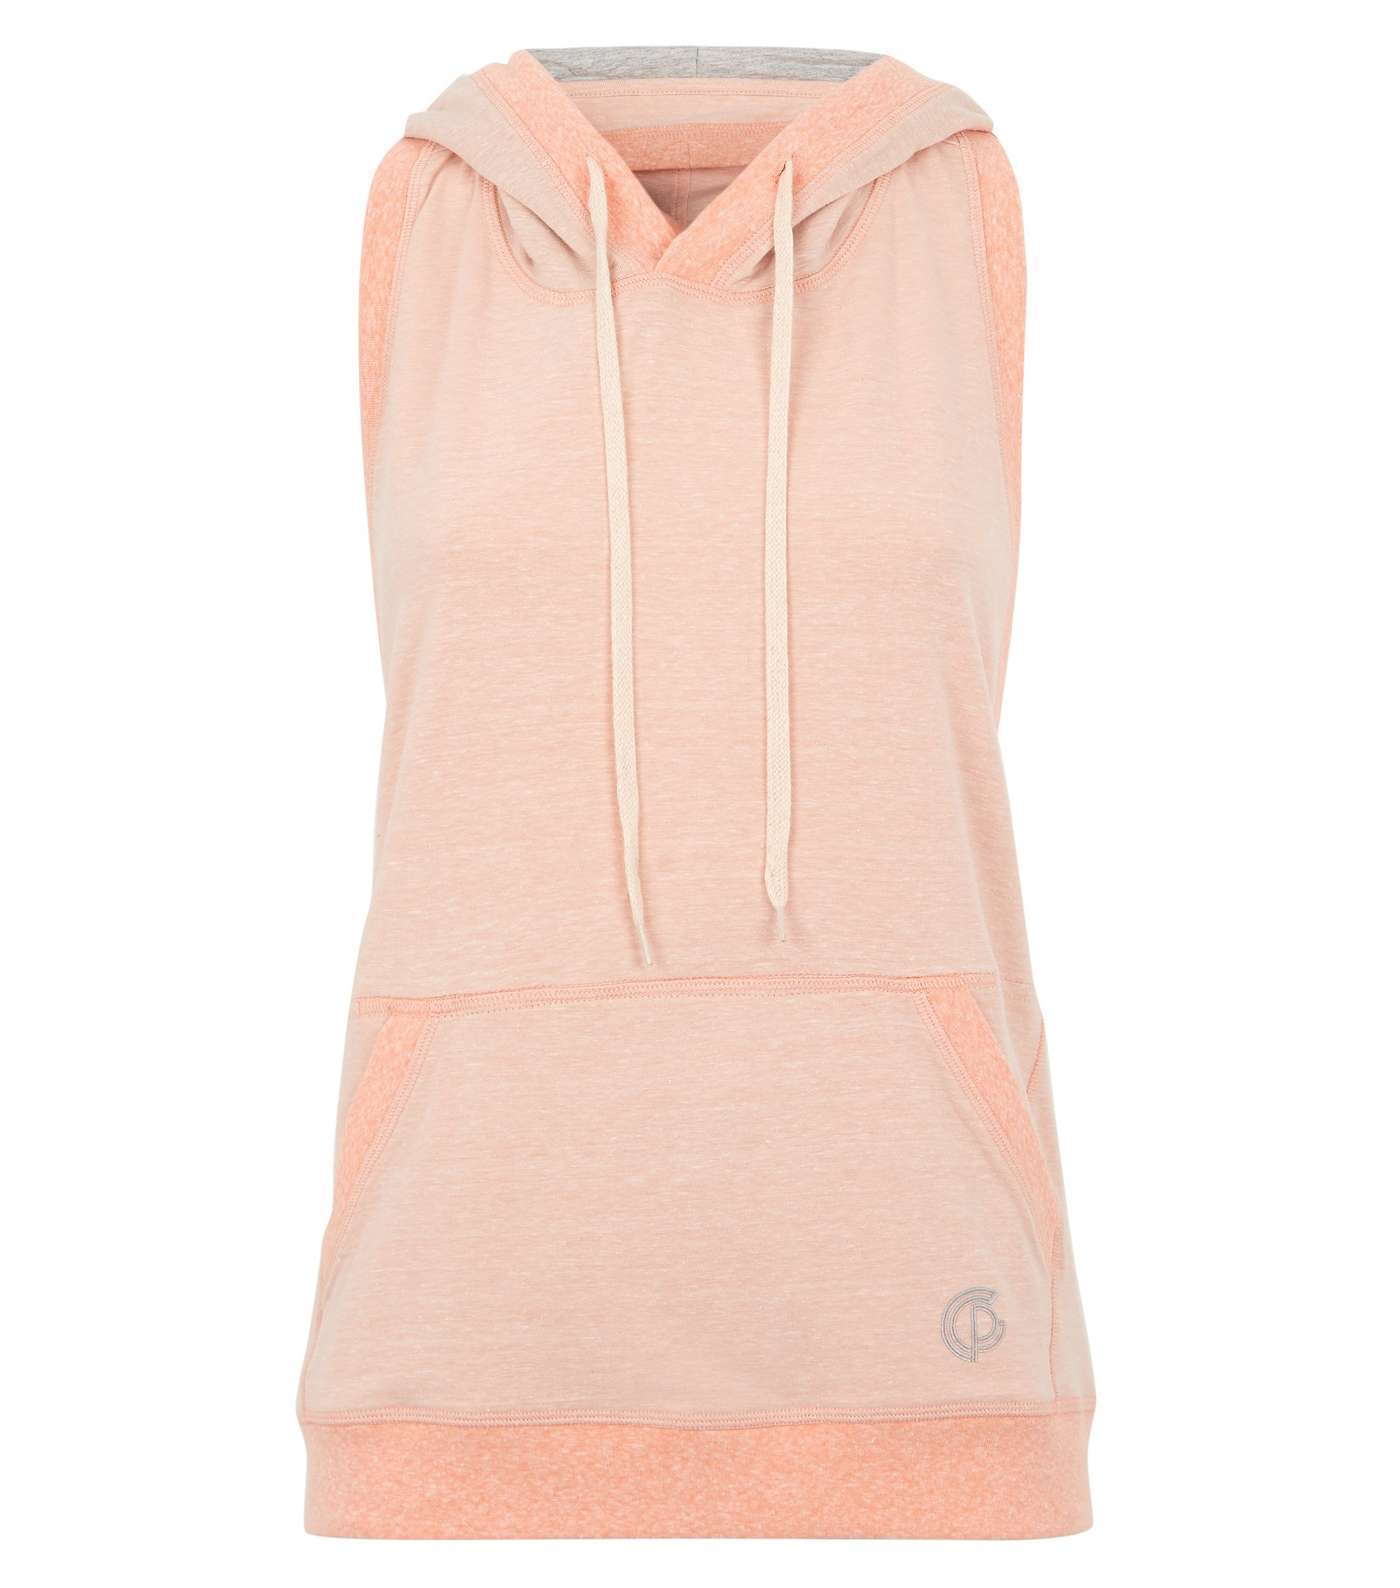 GrymPro Pale Pink Backless Sports Hoodie Image 4